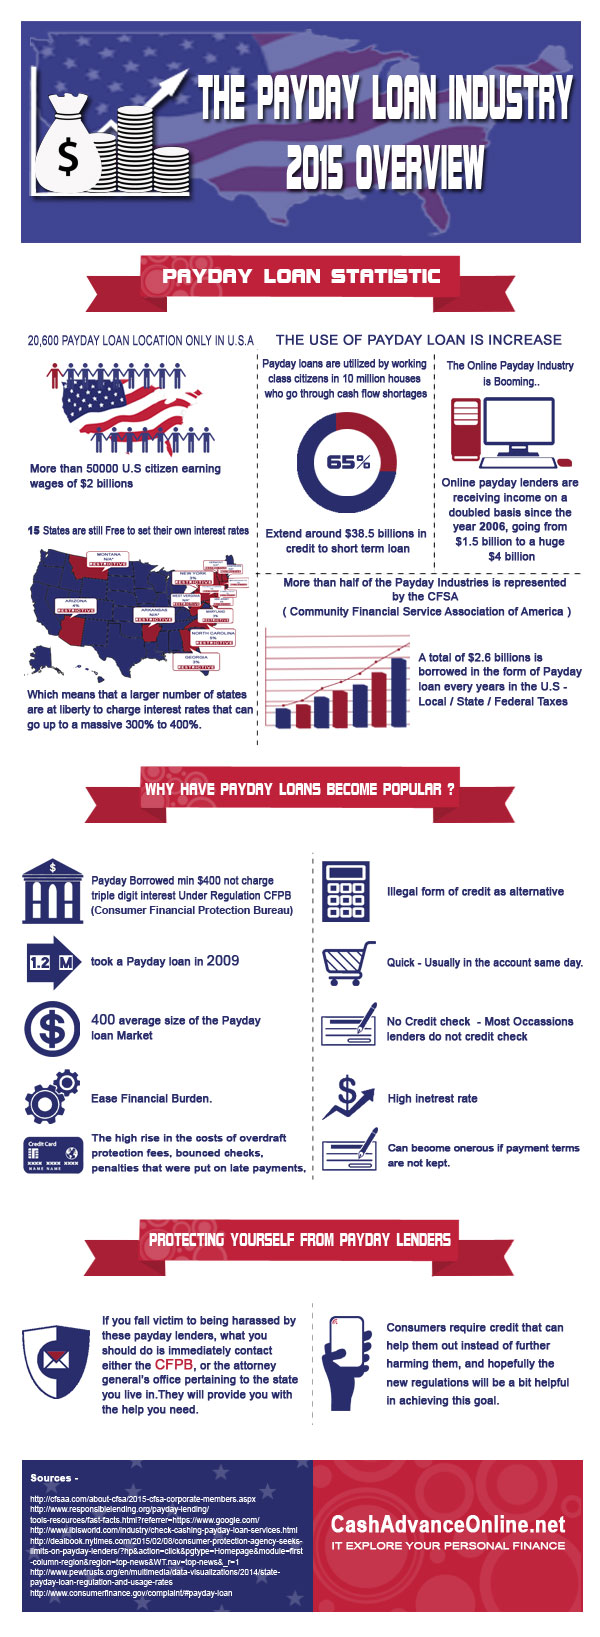 cash advance and payday loan industry infographic